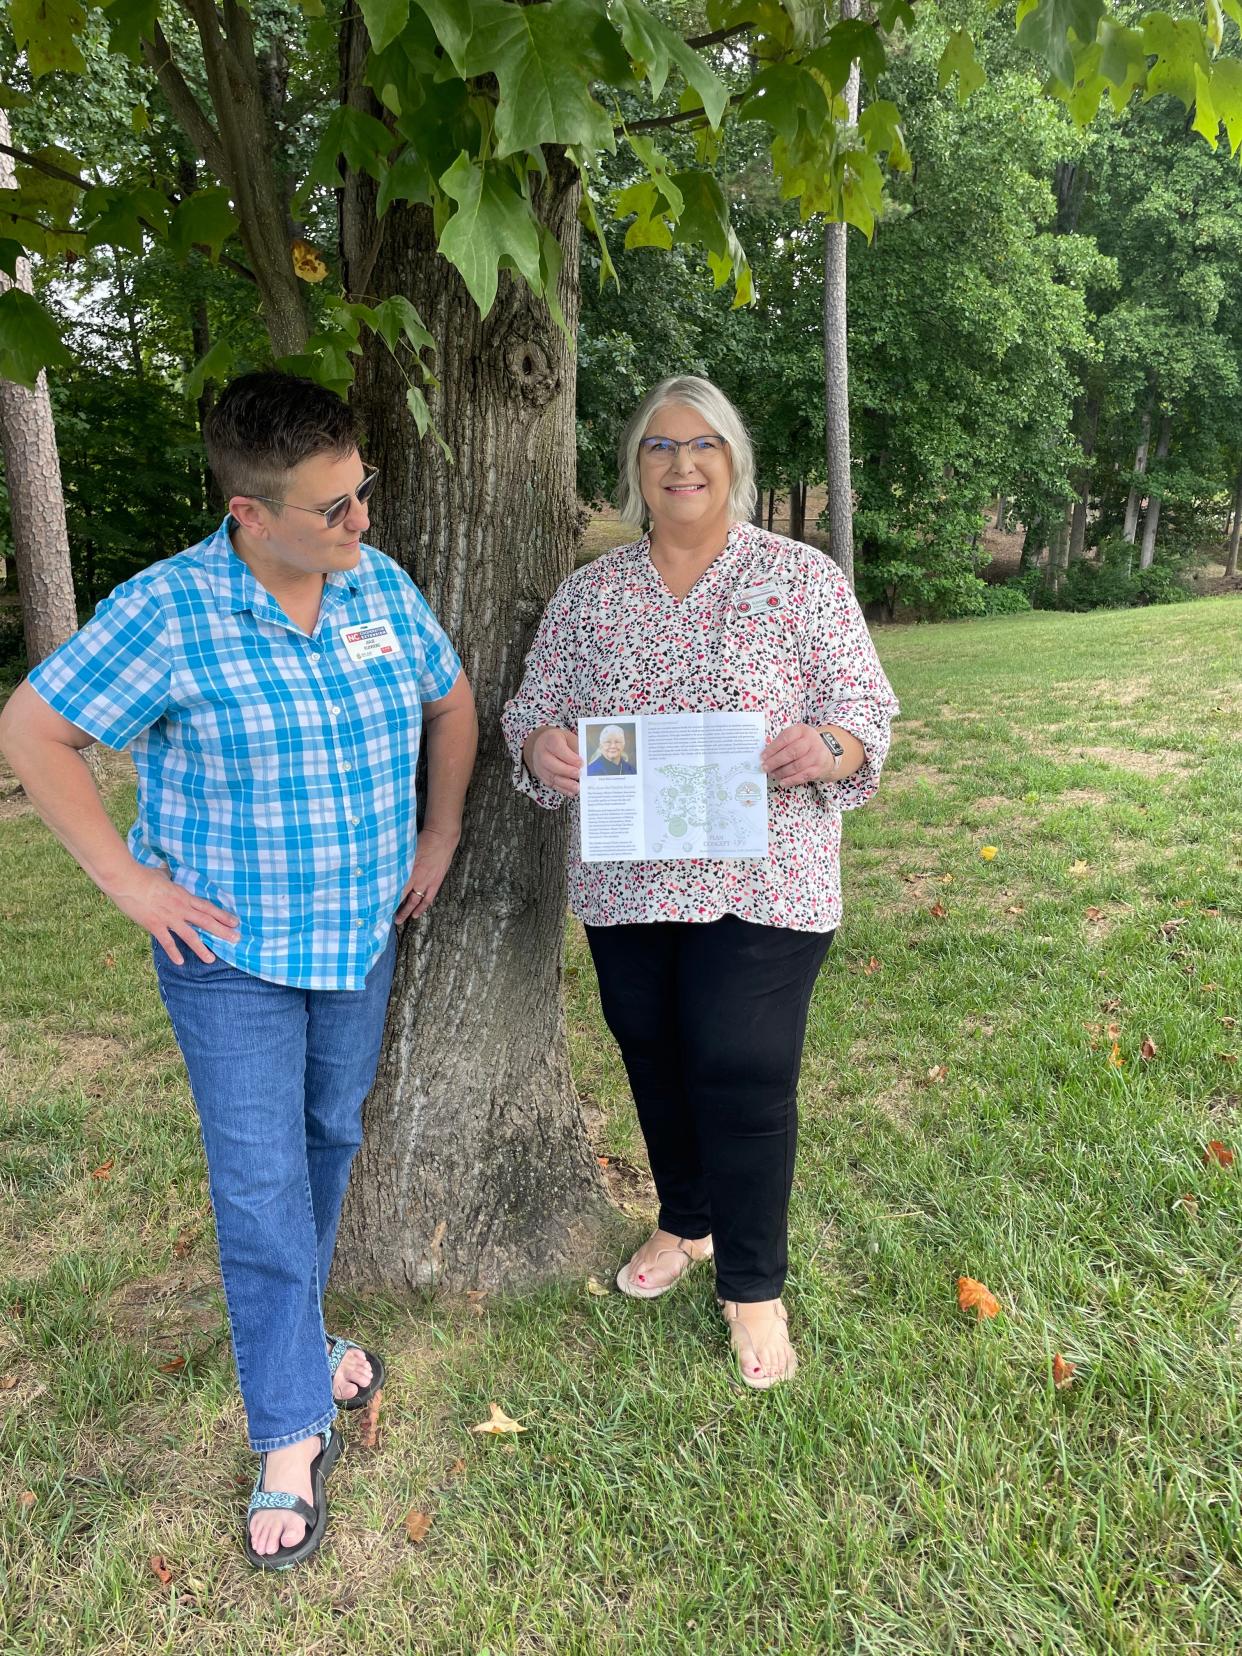 Anne Eskridge, member of the Dotty Leatherwood Memorial Garden Planning Committee, holds up a brochure with details on a proposed memorial garden while Julie Flowers, with the NC Cooperative Extension Office, looks on. Several groups have come together to plan the garden which will be located near the LeGrand Center.